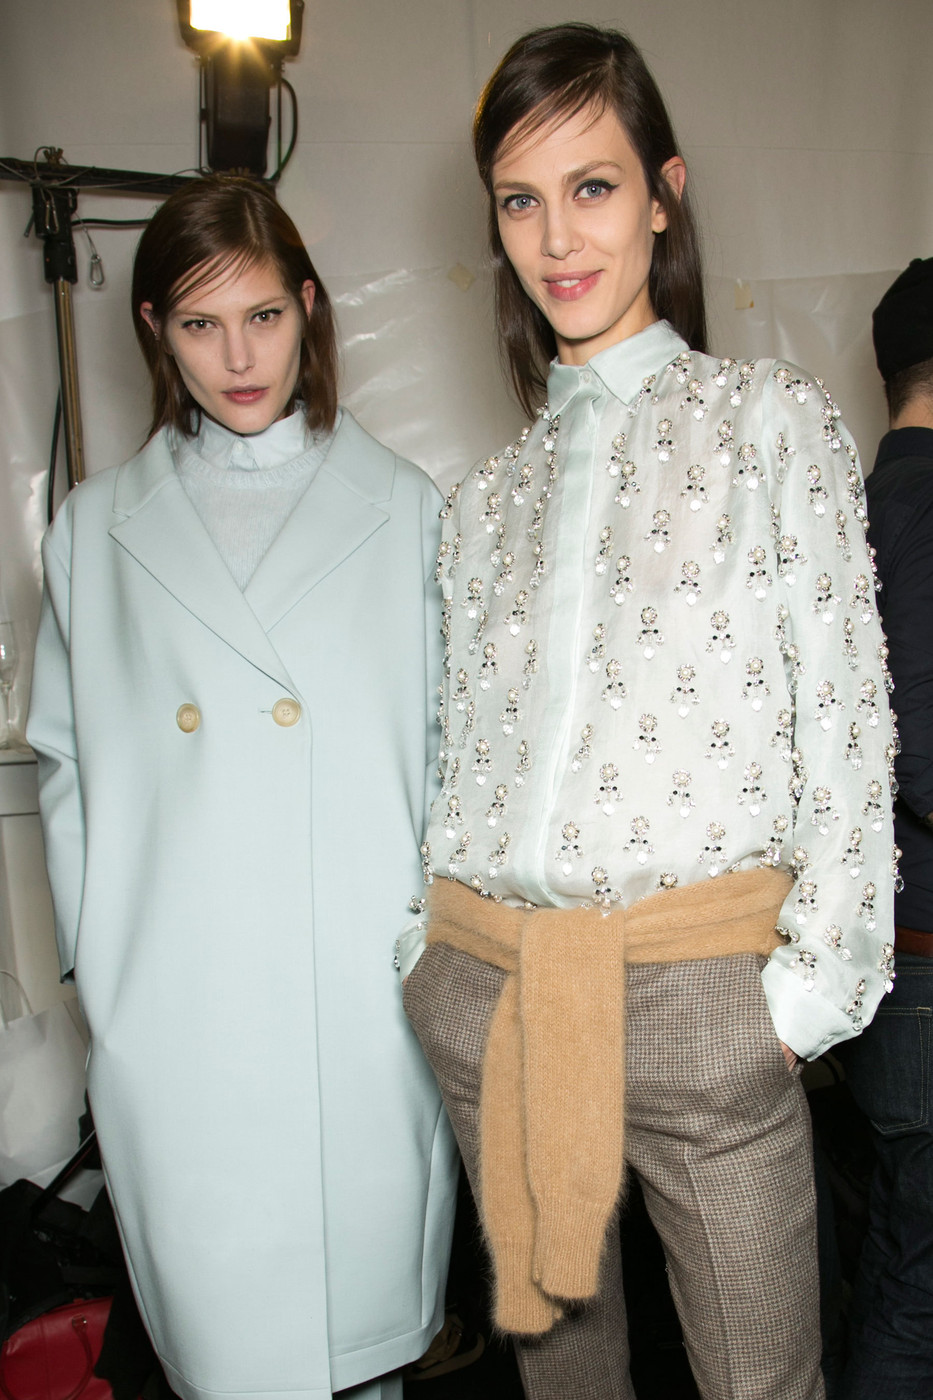 No 21 Fall 2013 Backstage OIVXC 4 Iw 2 VVx